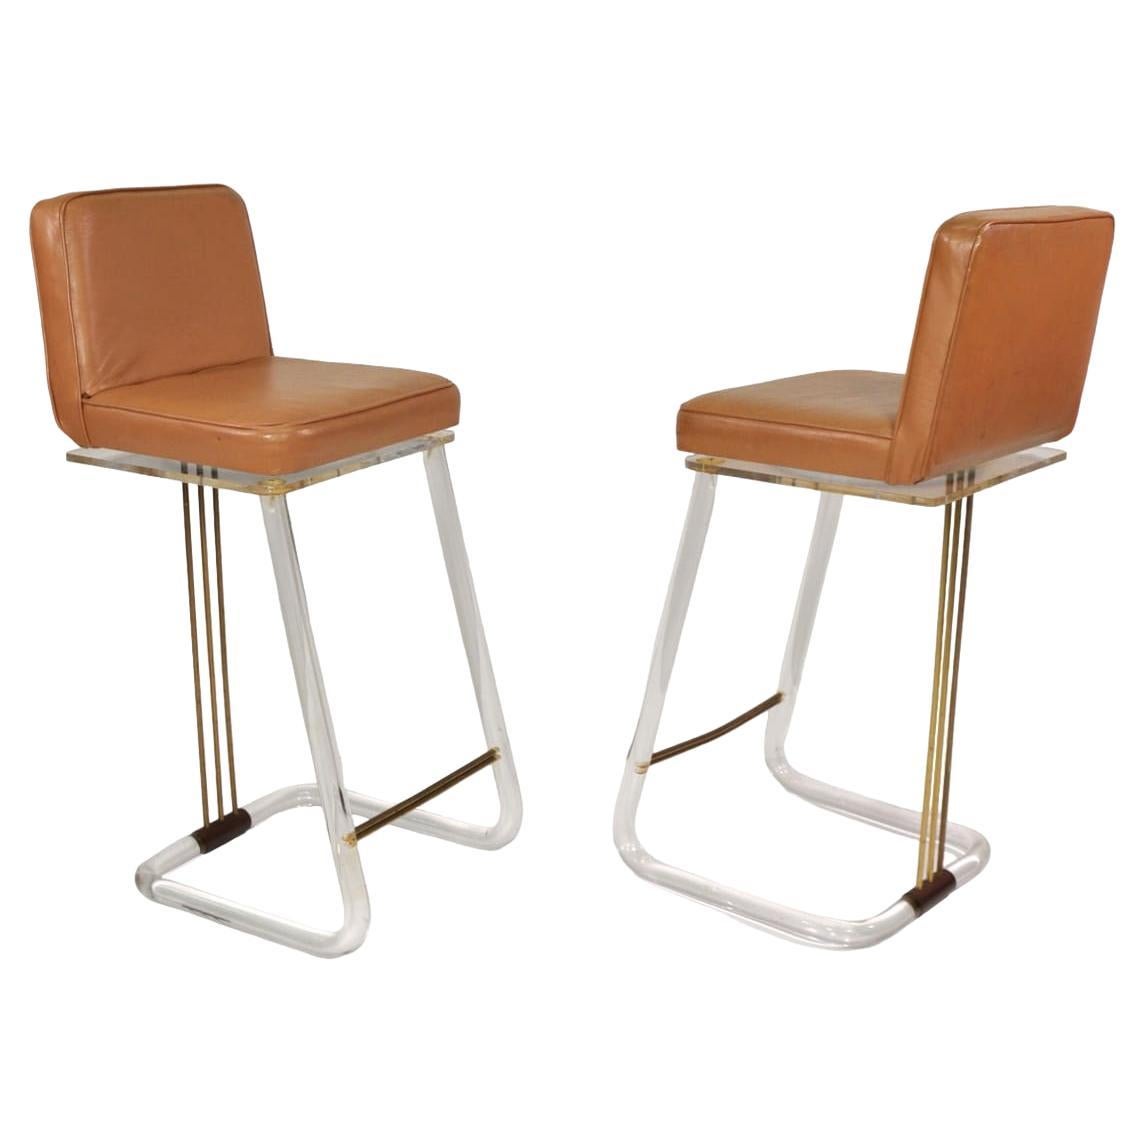 Pair of Mid-Century Modern swiveling bar stools from the 1970s, by Lion in Frost. The vintage stools feature clear tubular lucite frames, brass rod accents and original brown leather seats. Add a touch of Hollywood Regency pizzazz to any interior